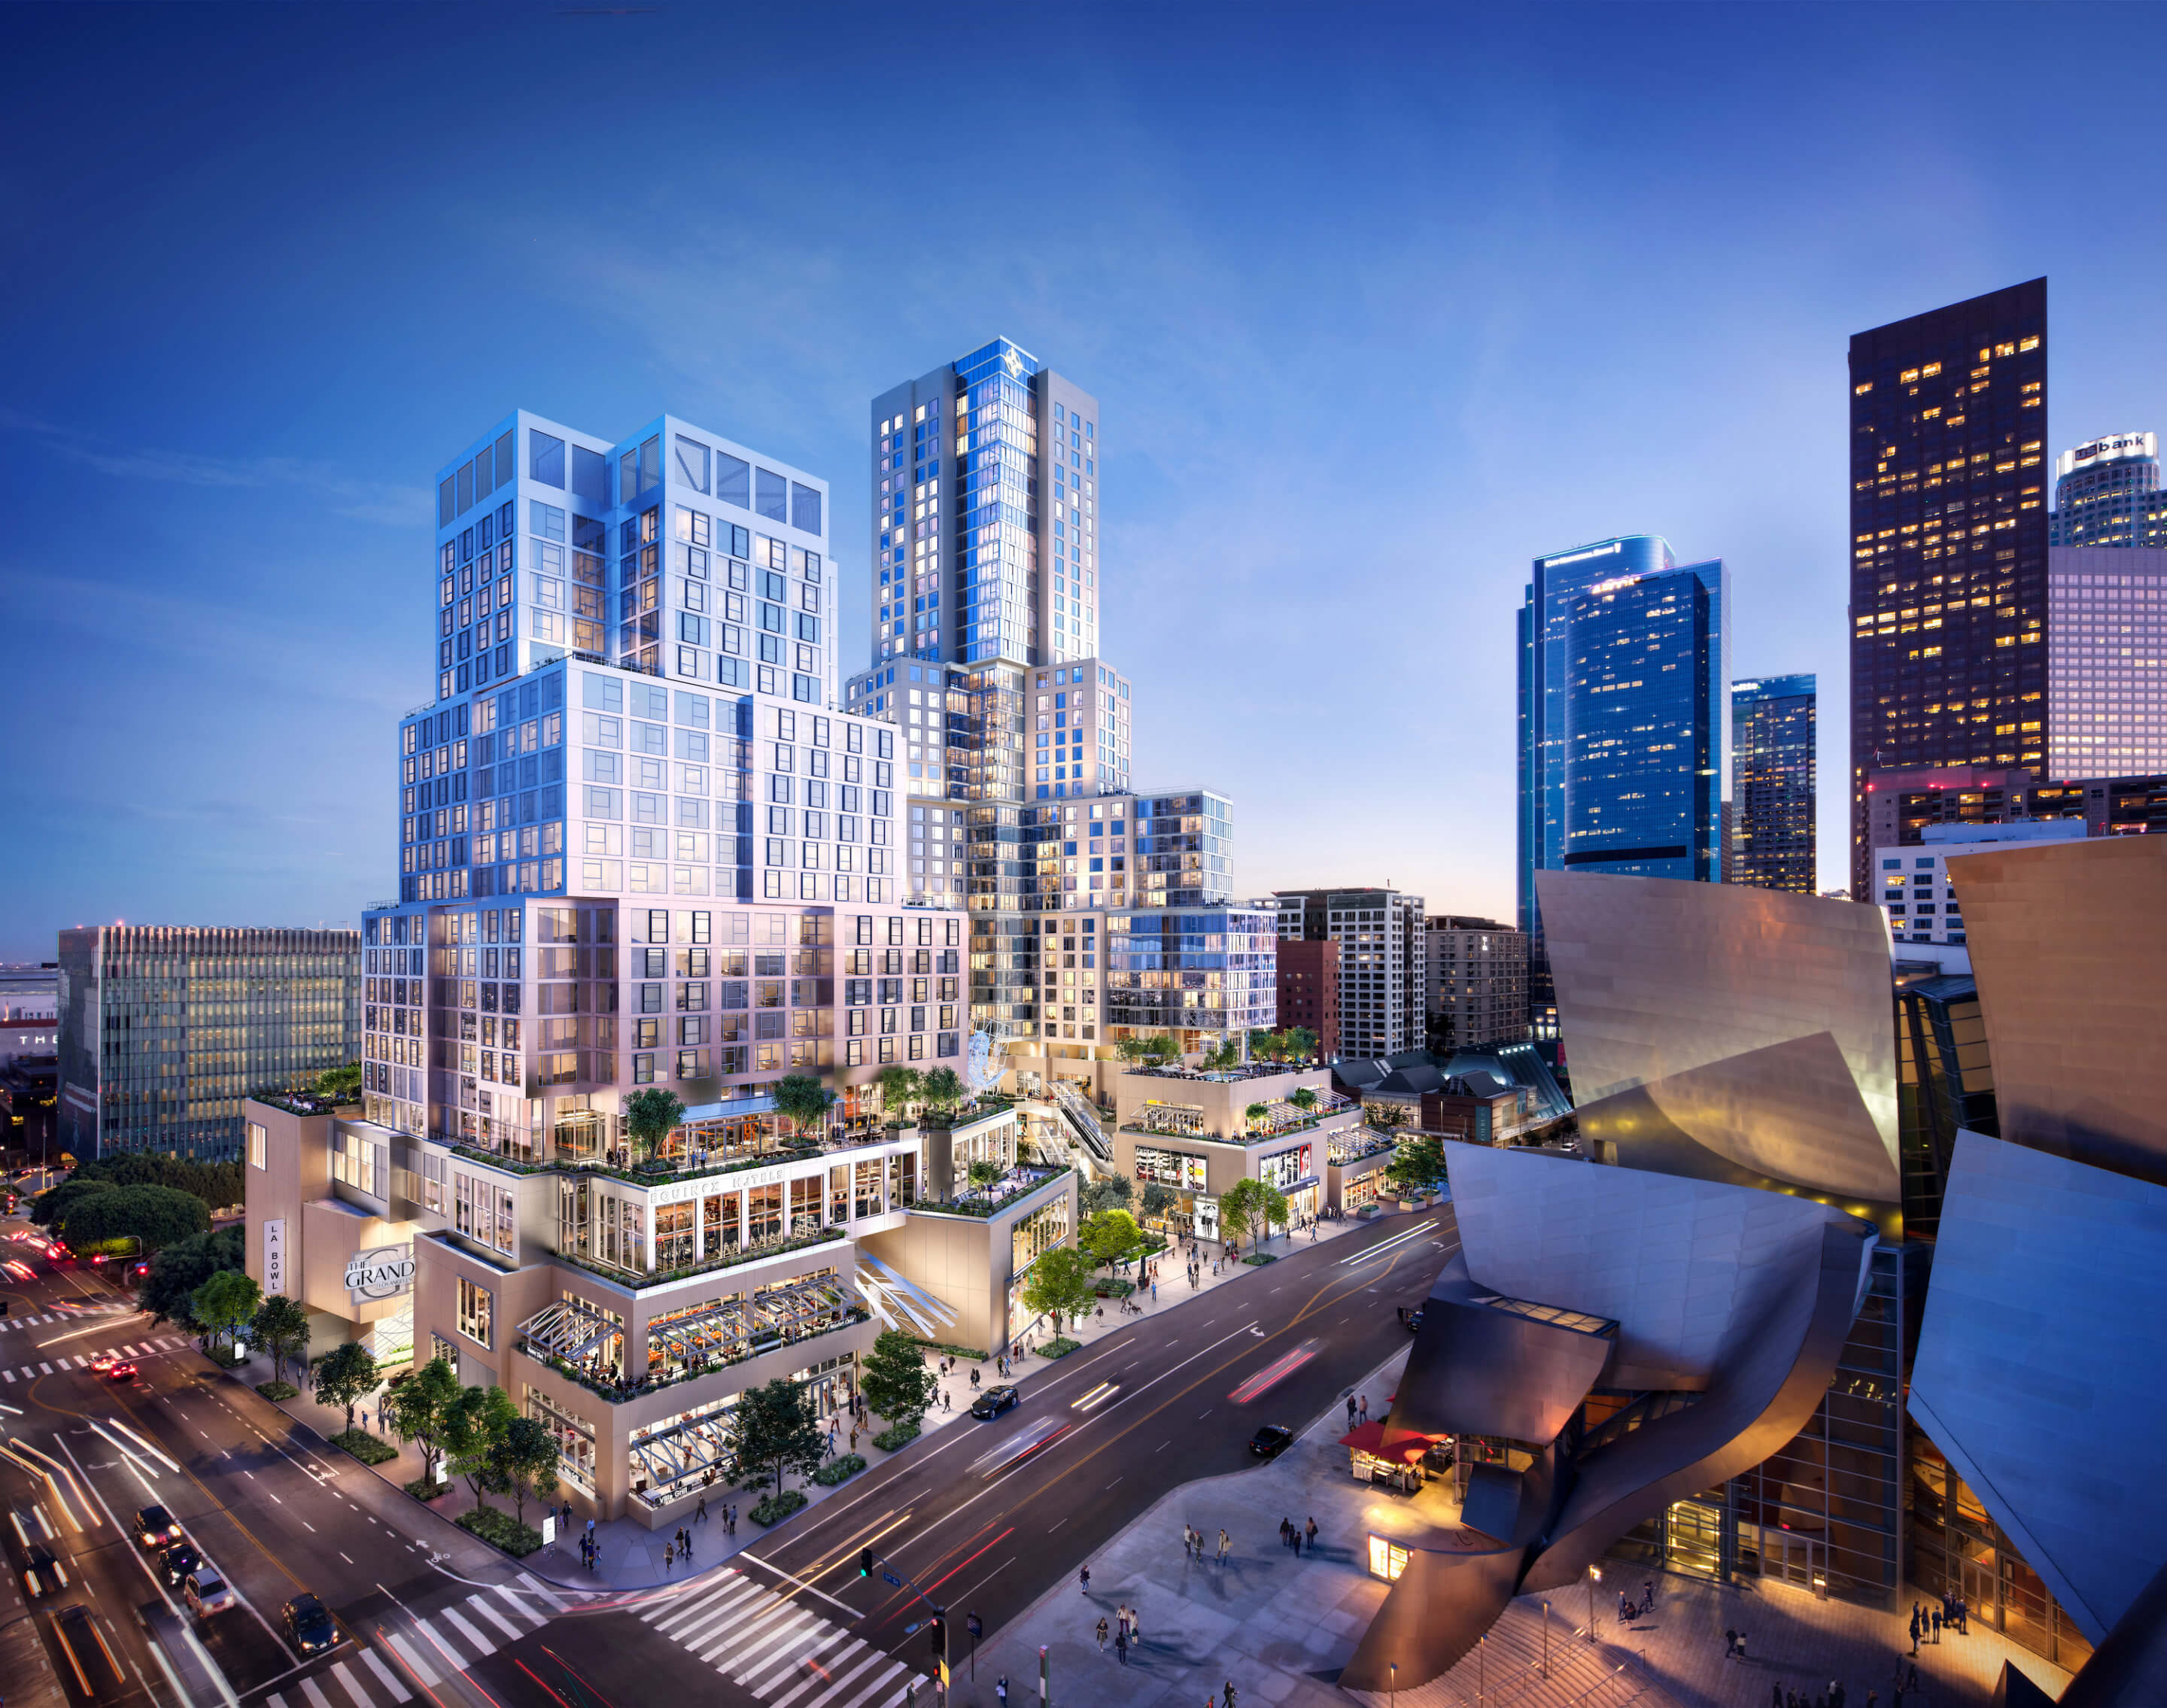 a frank gehry designed mixed use complex with twisting towers